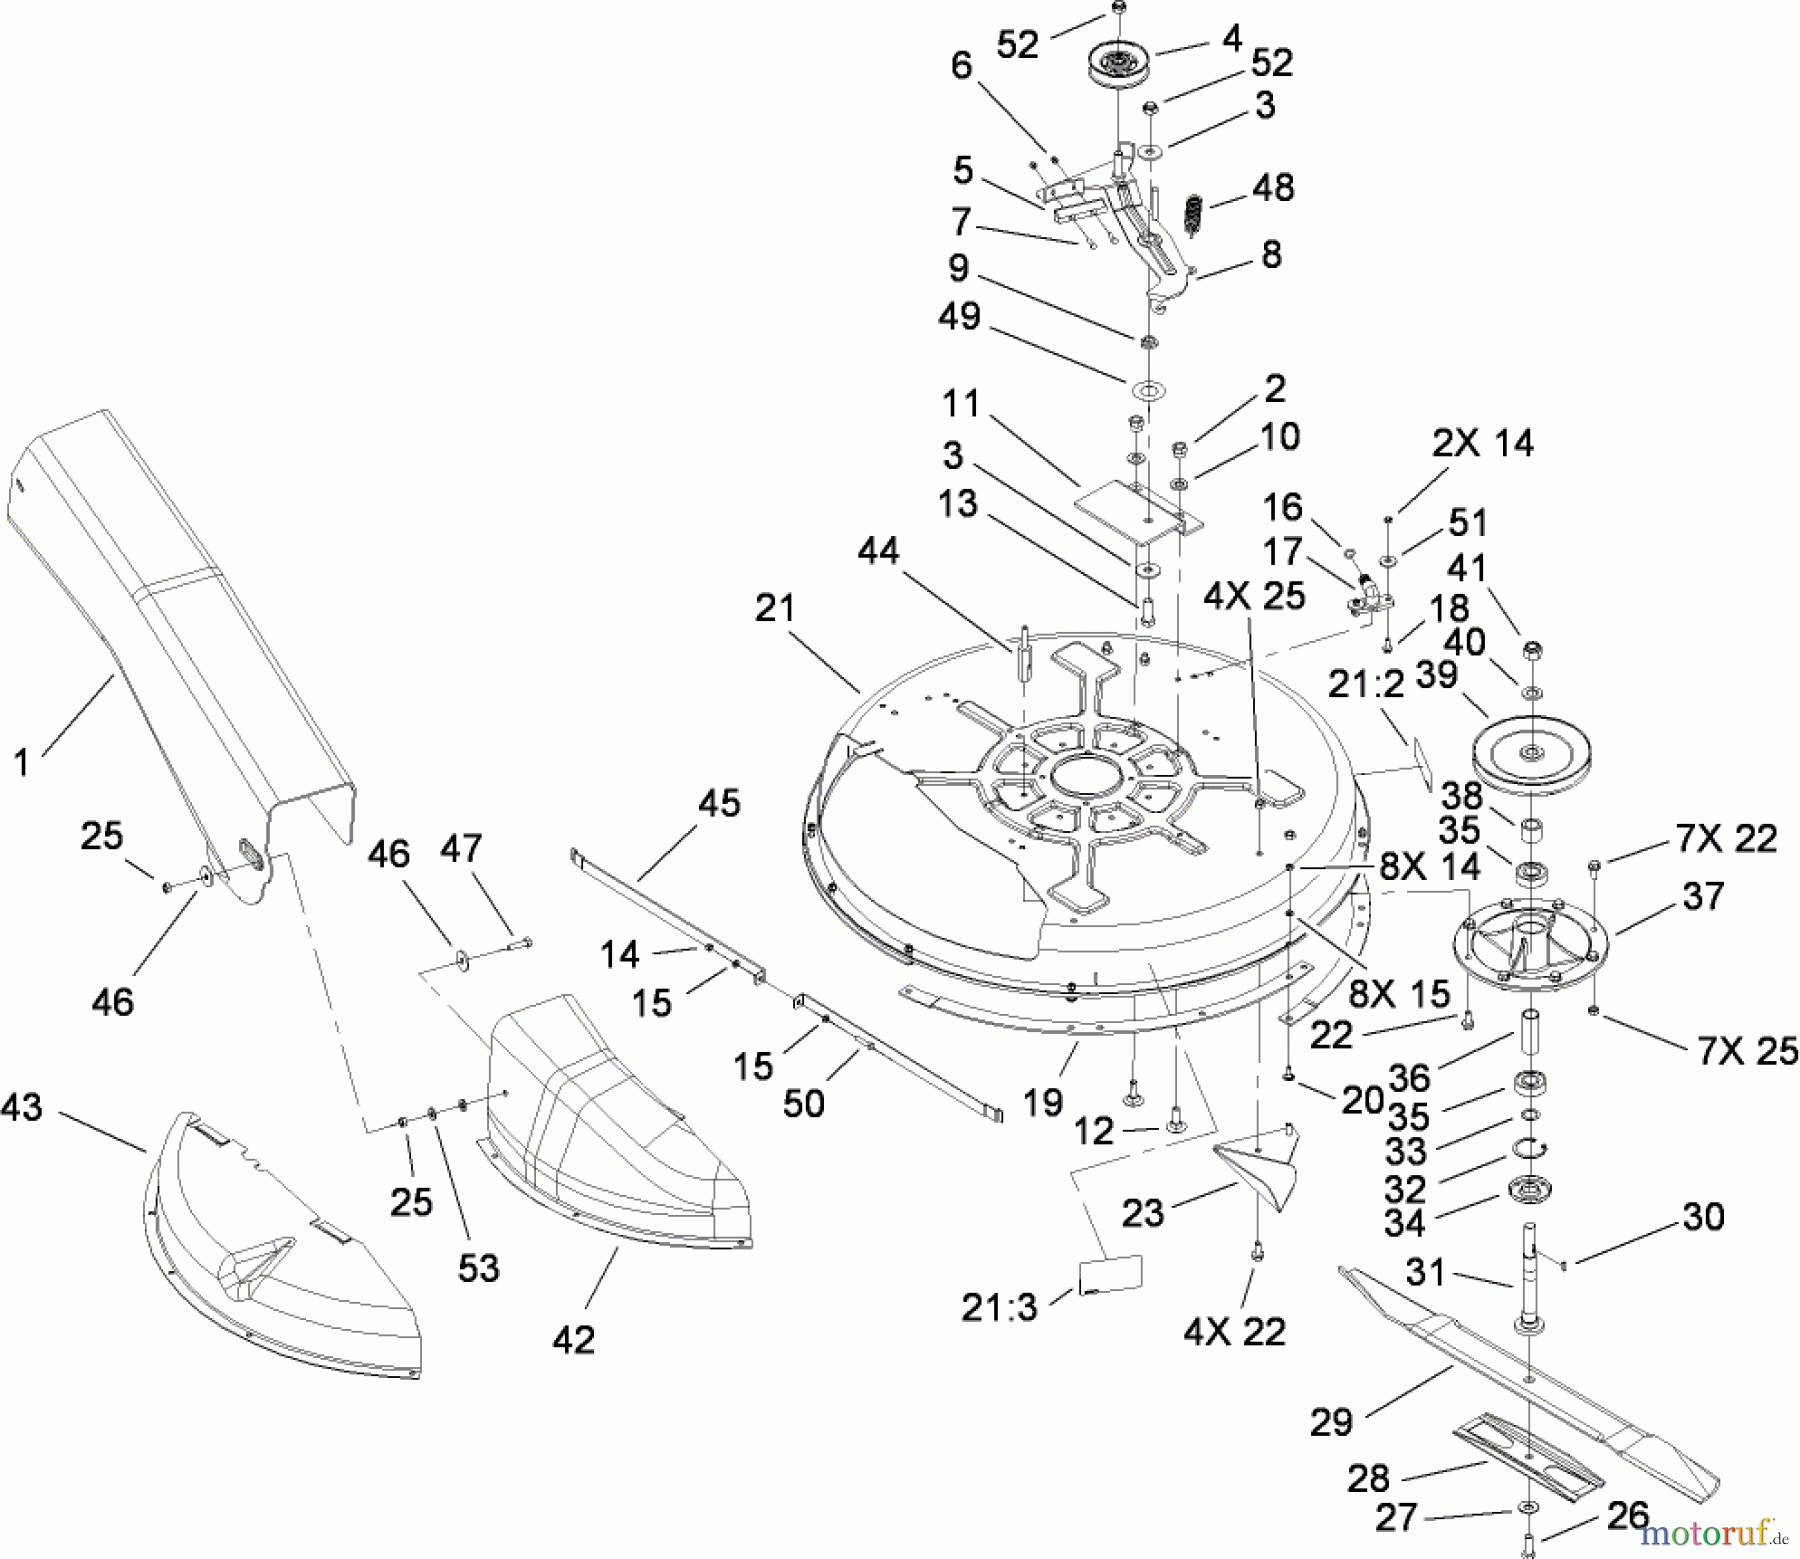  Toro Neu Mowers, Rear-Engine Rider 70185 (G132) - Toro G132 Rear-Engine Riding Mower, 2008 (270805706-280899564) DECK AND SPINDLE ASSEMBLY